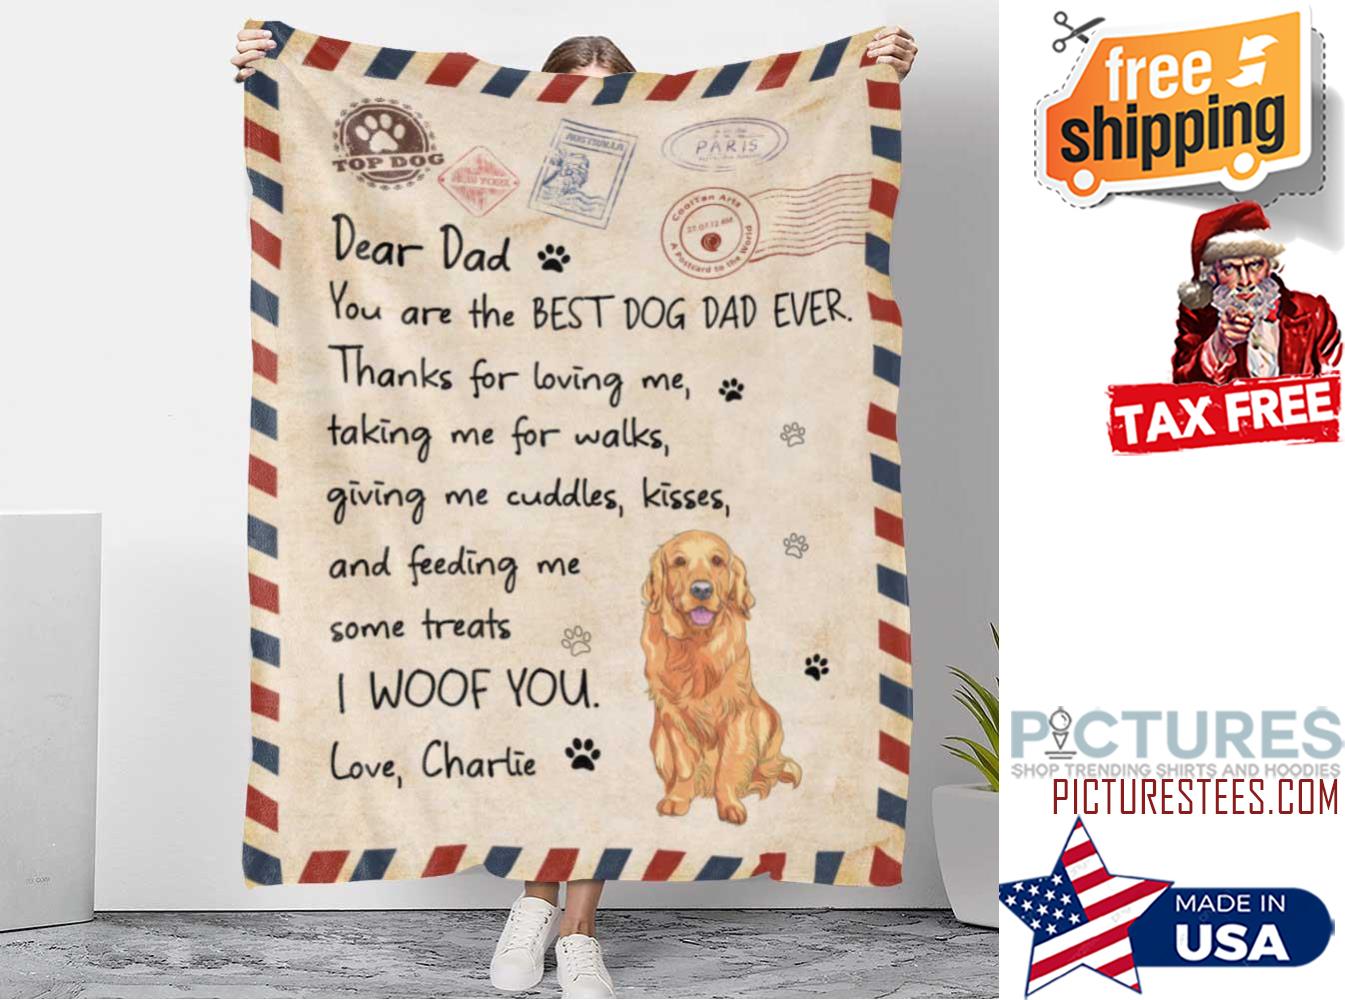 https://images.picturestees.com/2021/12/thank-you-dog-dad-mom-personalized-custom-fleece-blanket-picturestees-shirt.jpg